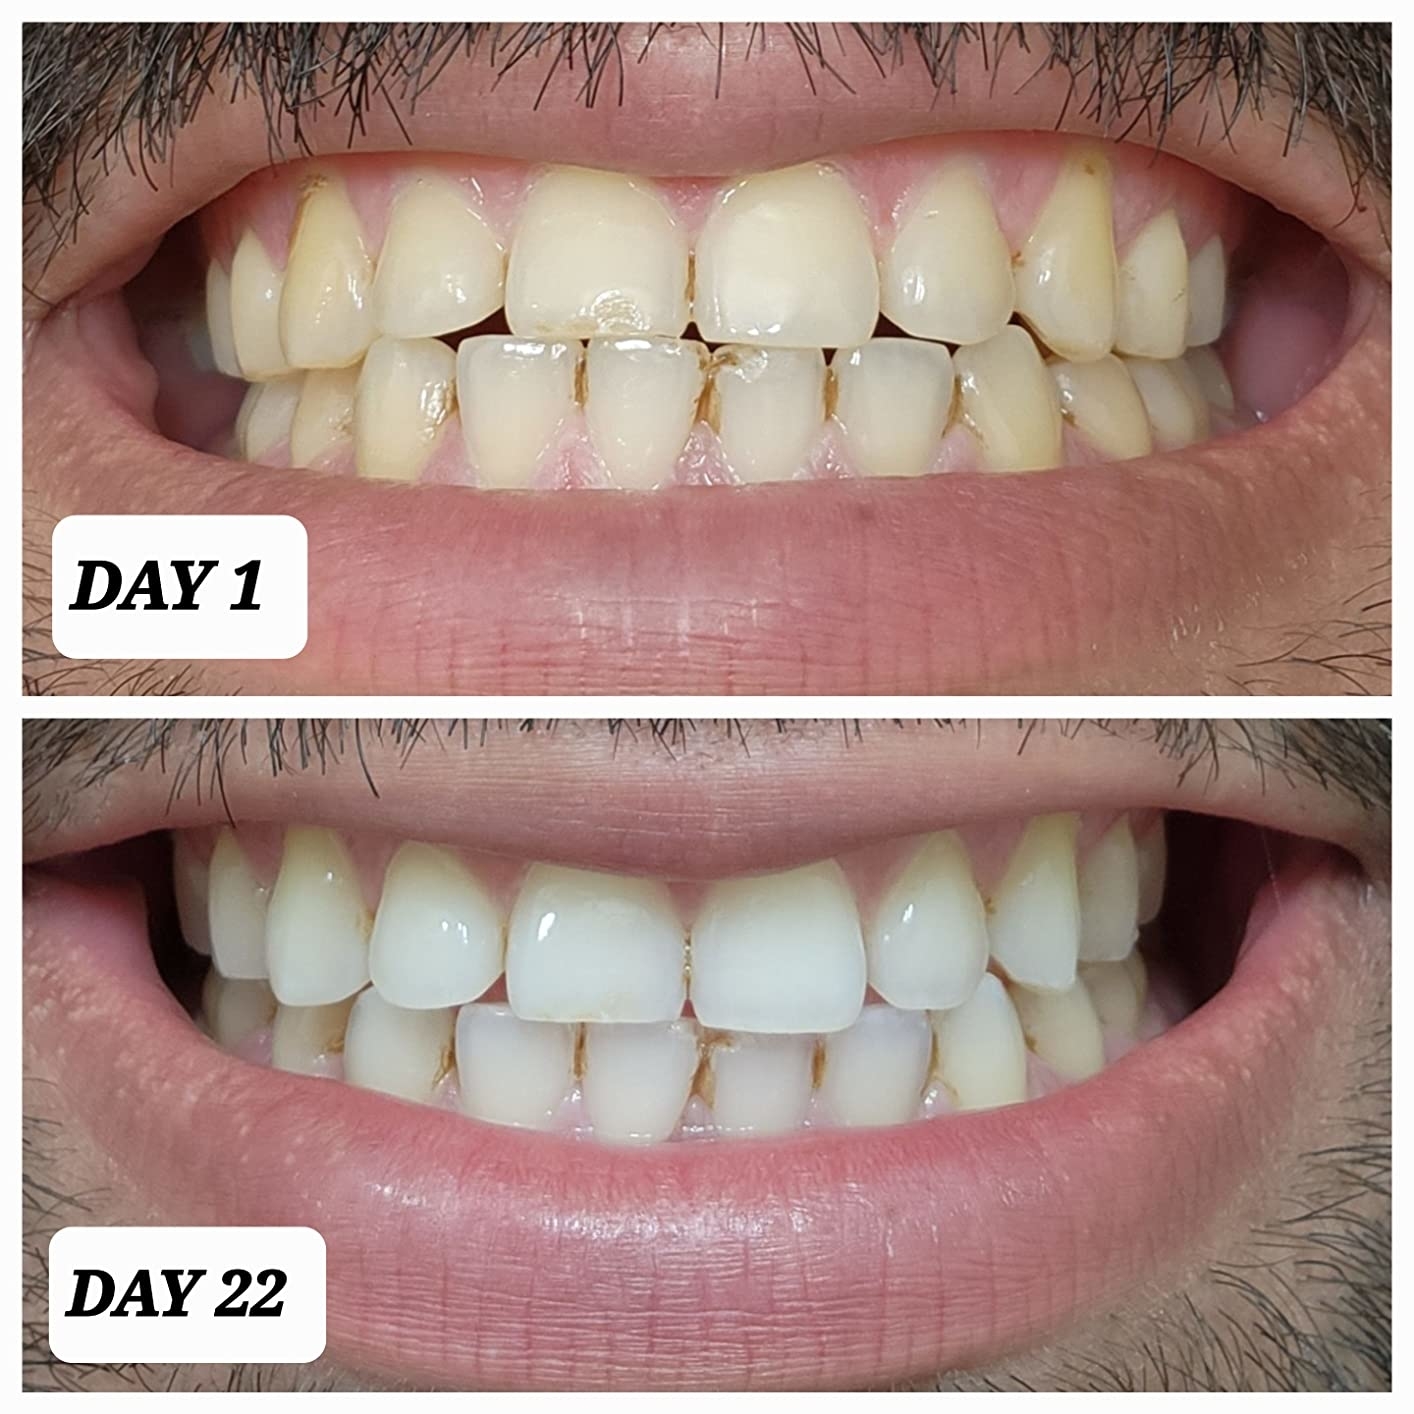 Reviewer image of their teeth before and after using the whitening strips